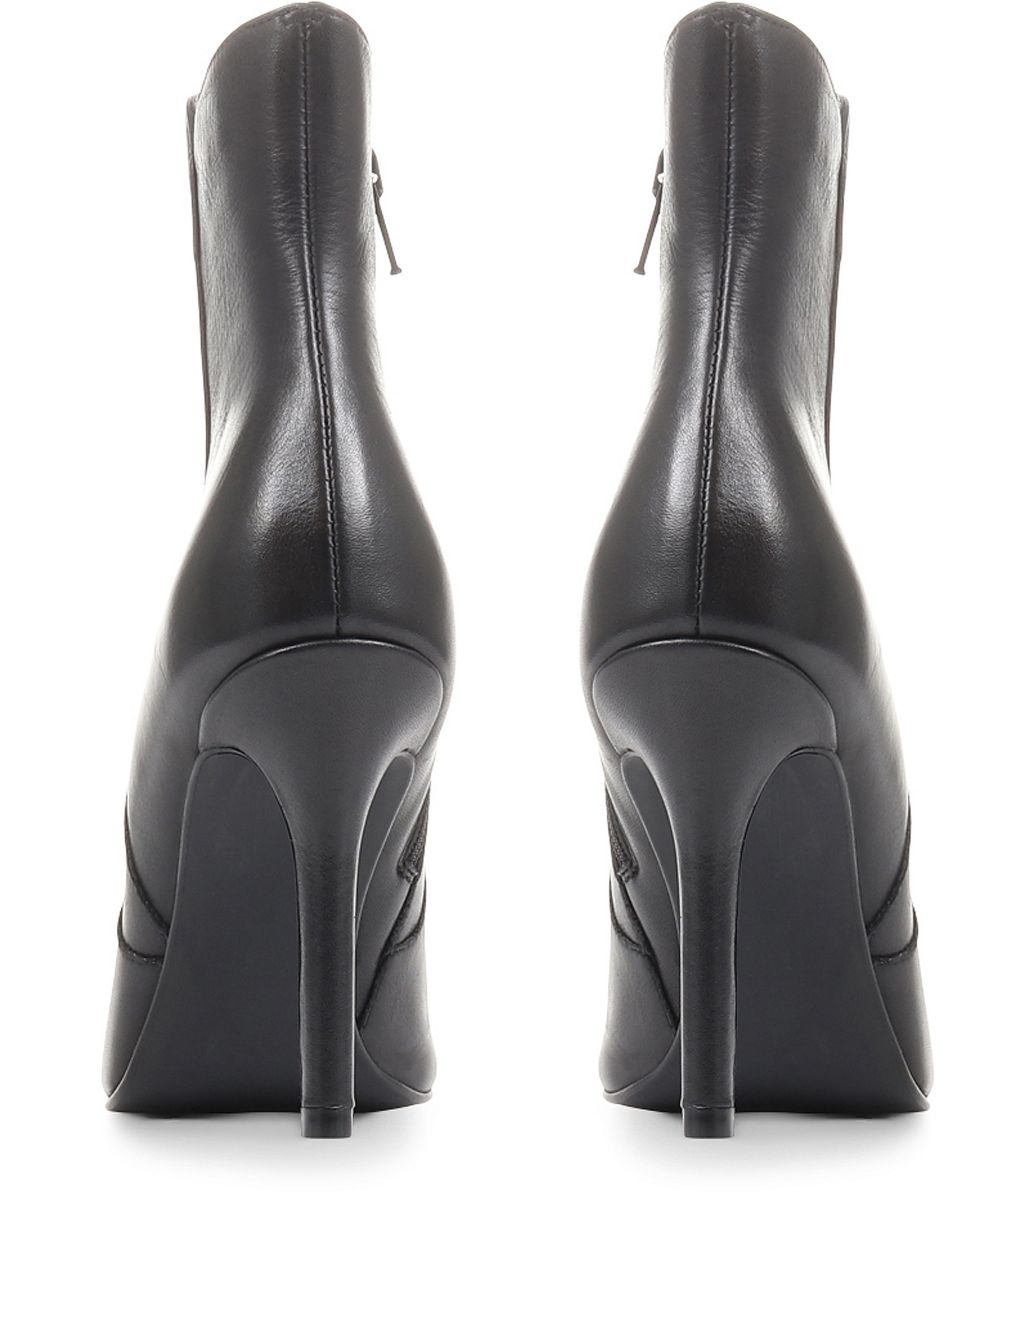 Leather Stiletto Heel Ankle Boots image 4